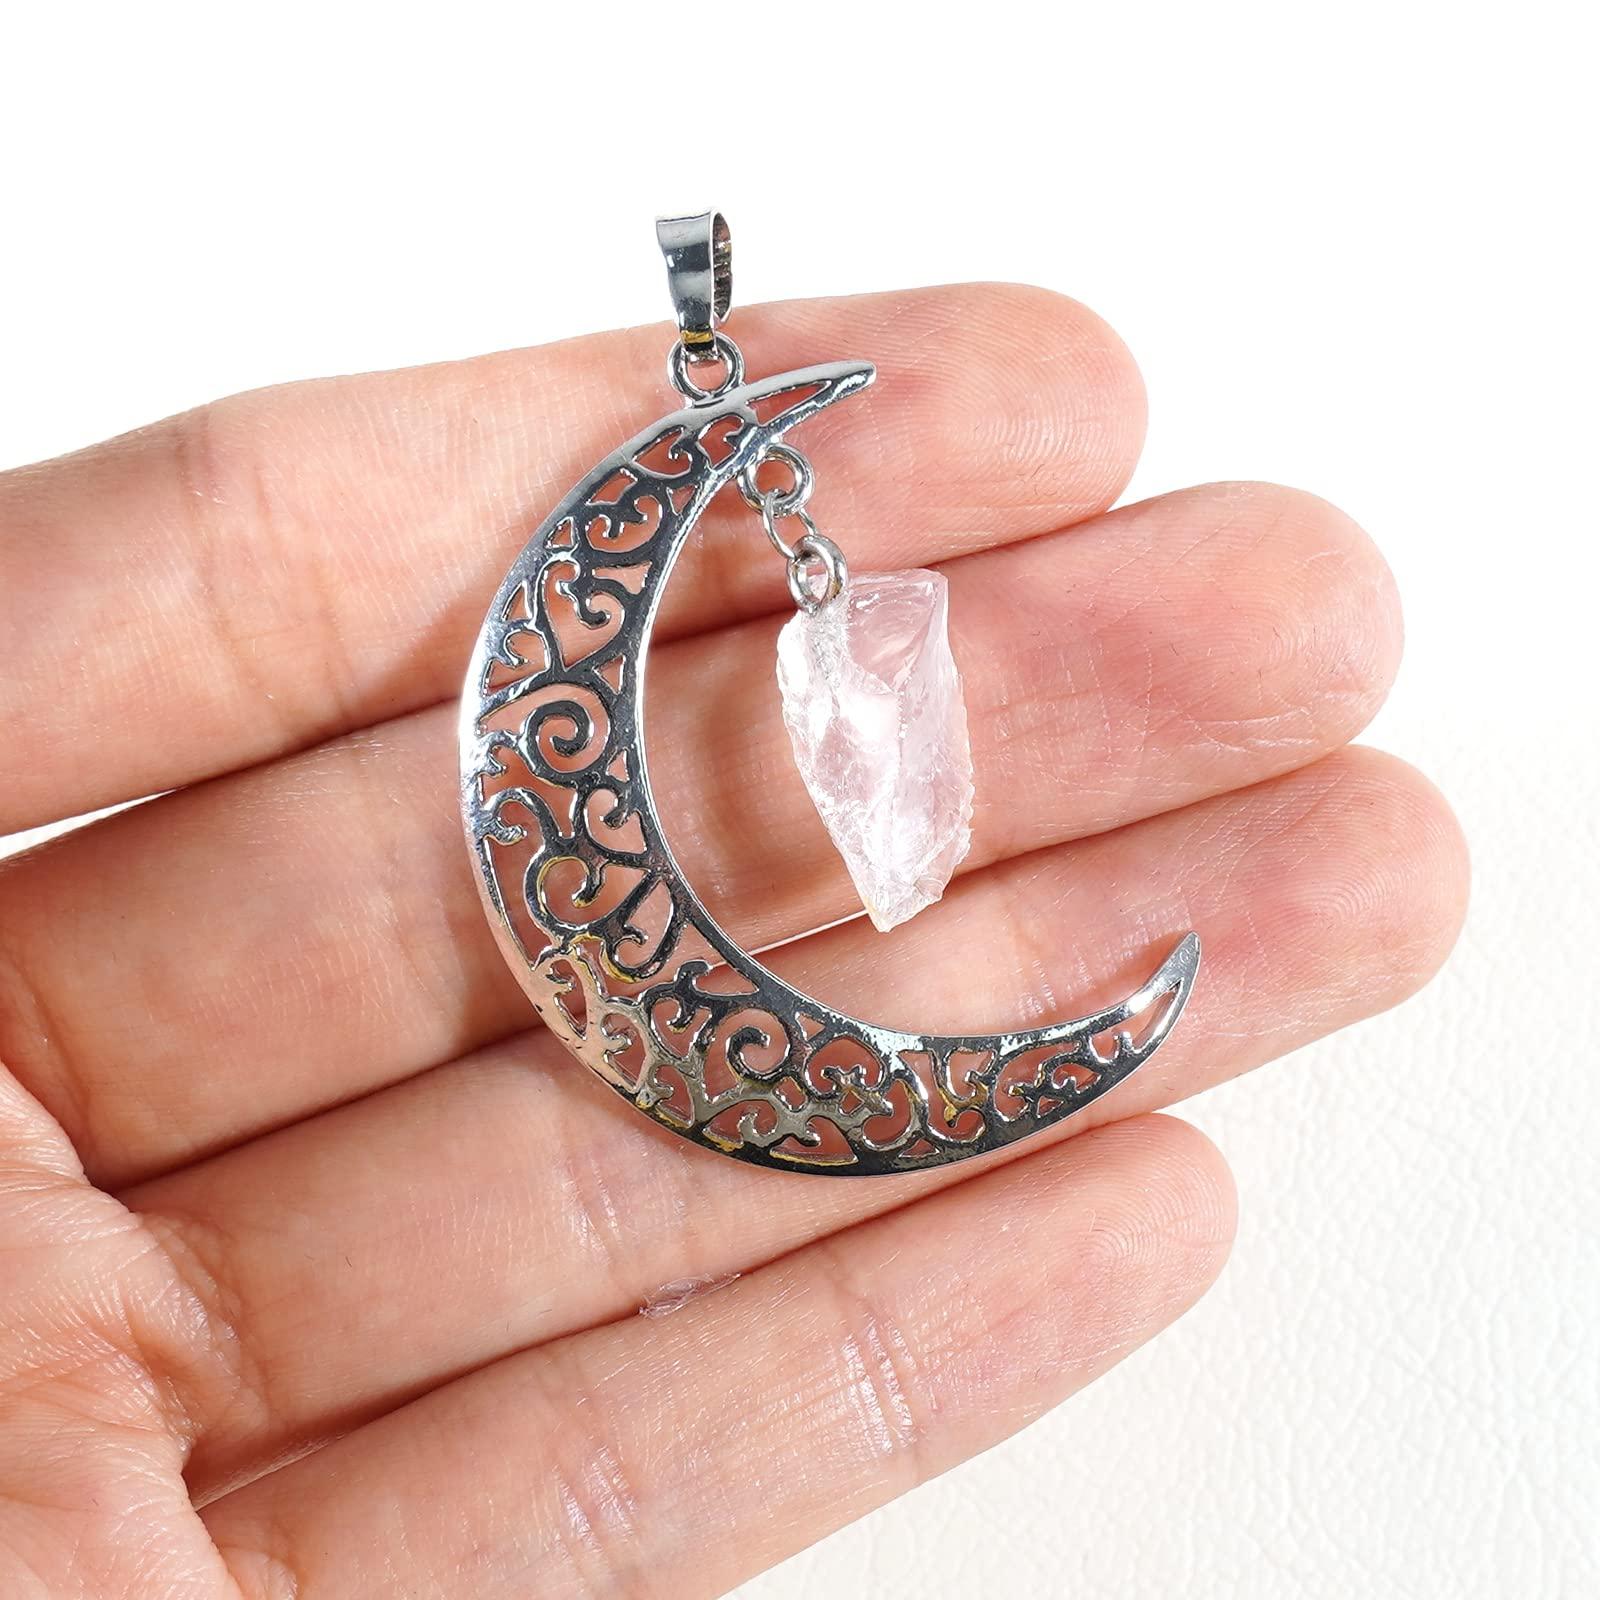 Soulnioi Gemstone Moon Necklace Antique Silver Plated Crystal Necklace Pendant (Rose Quartz) , Crystal Owl Statue Ornament Resin Chip Stones Figurine for Home Office Decor(Colored) 4